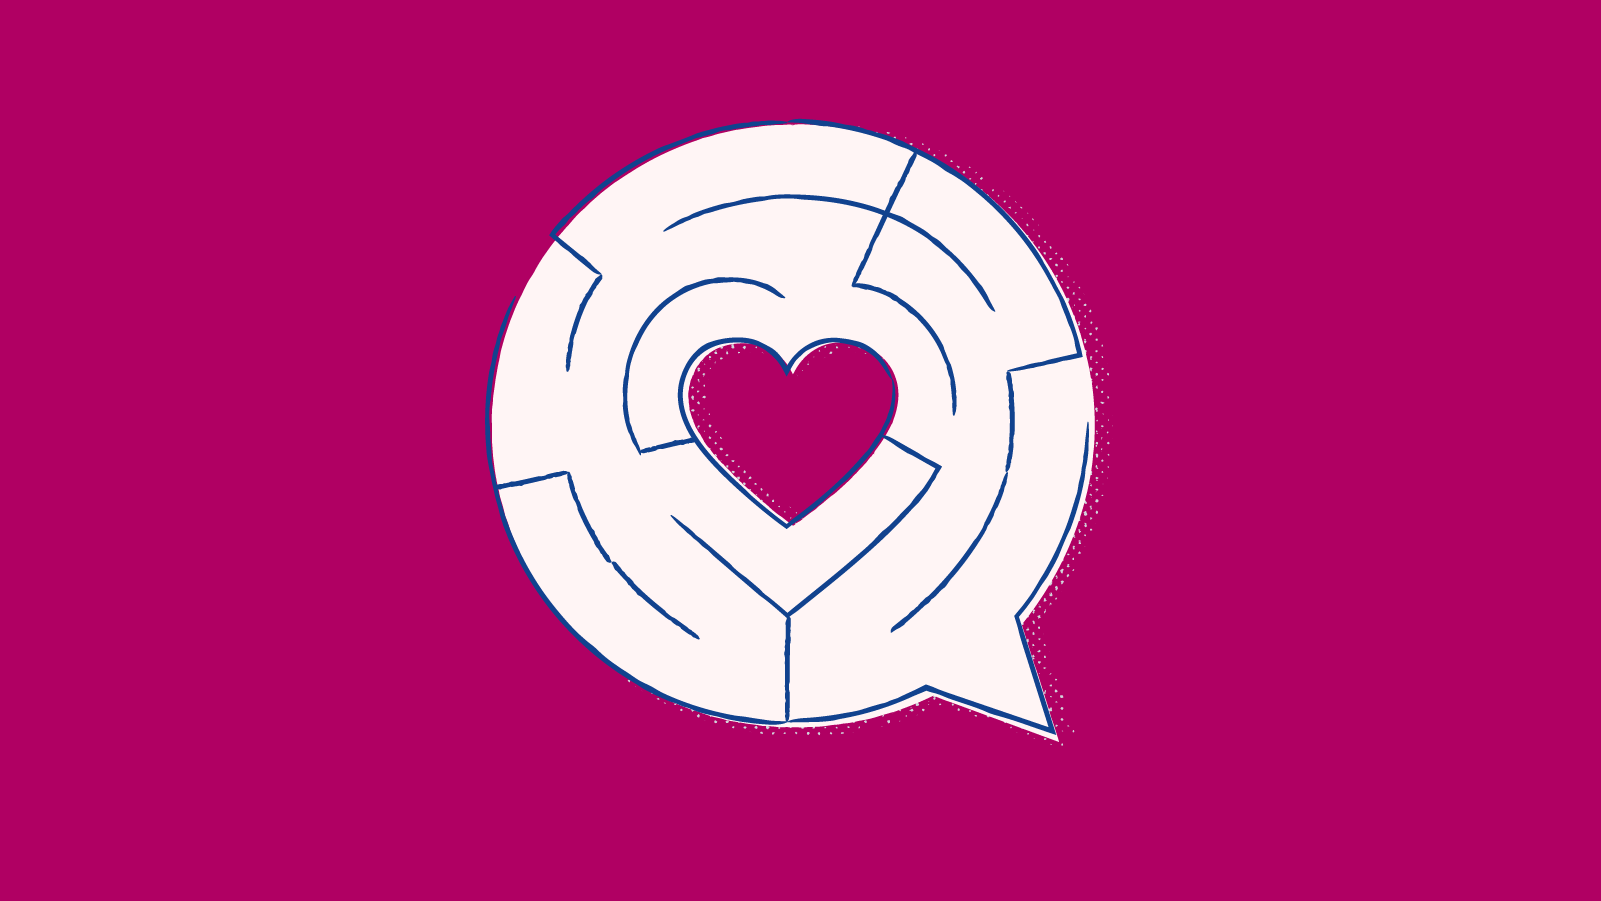 Speech bubble with a maze that leads to a heart within